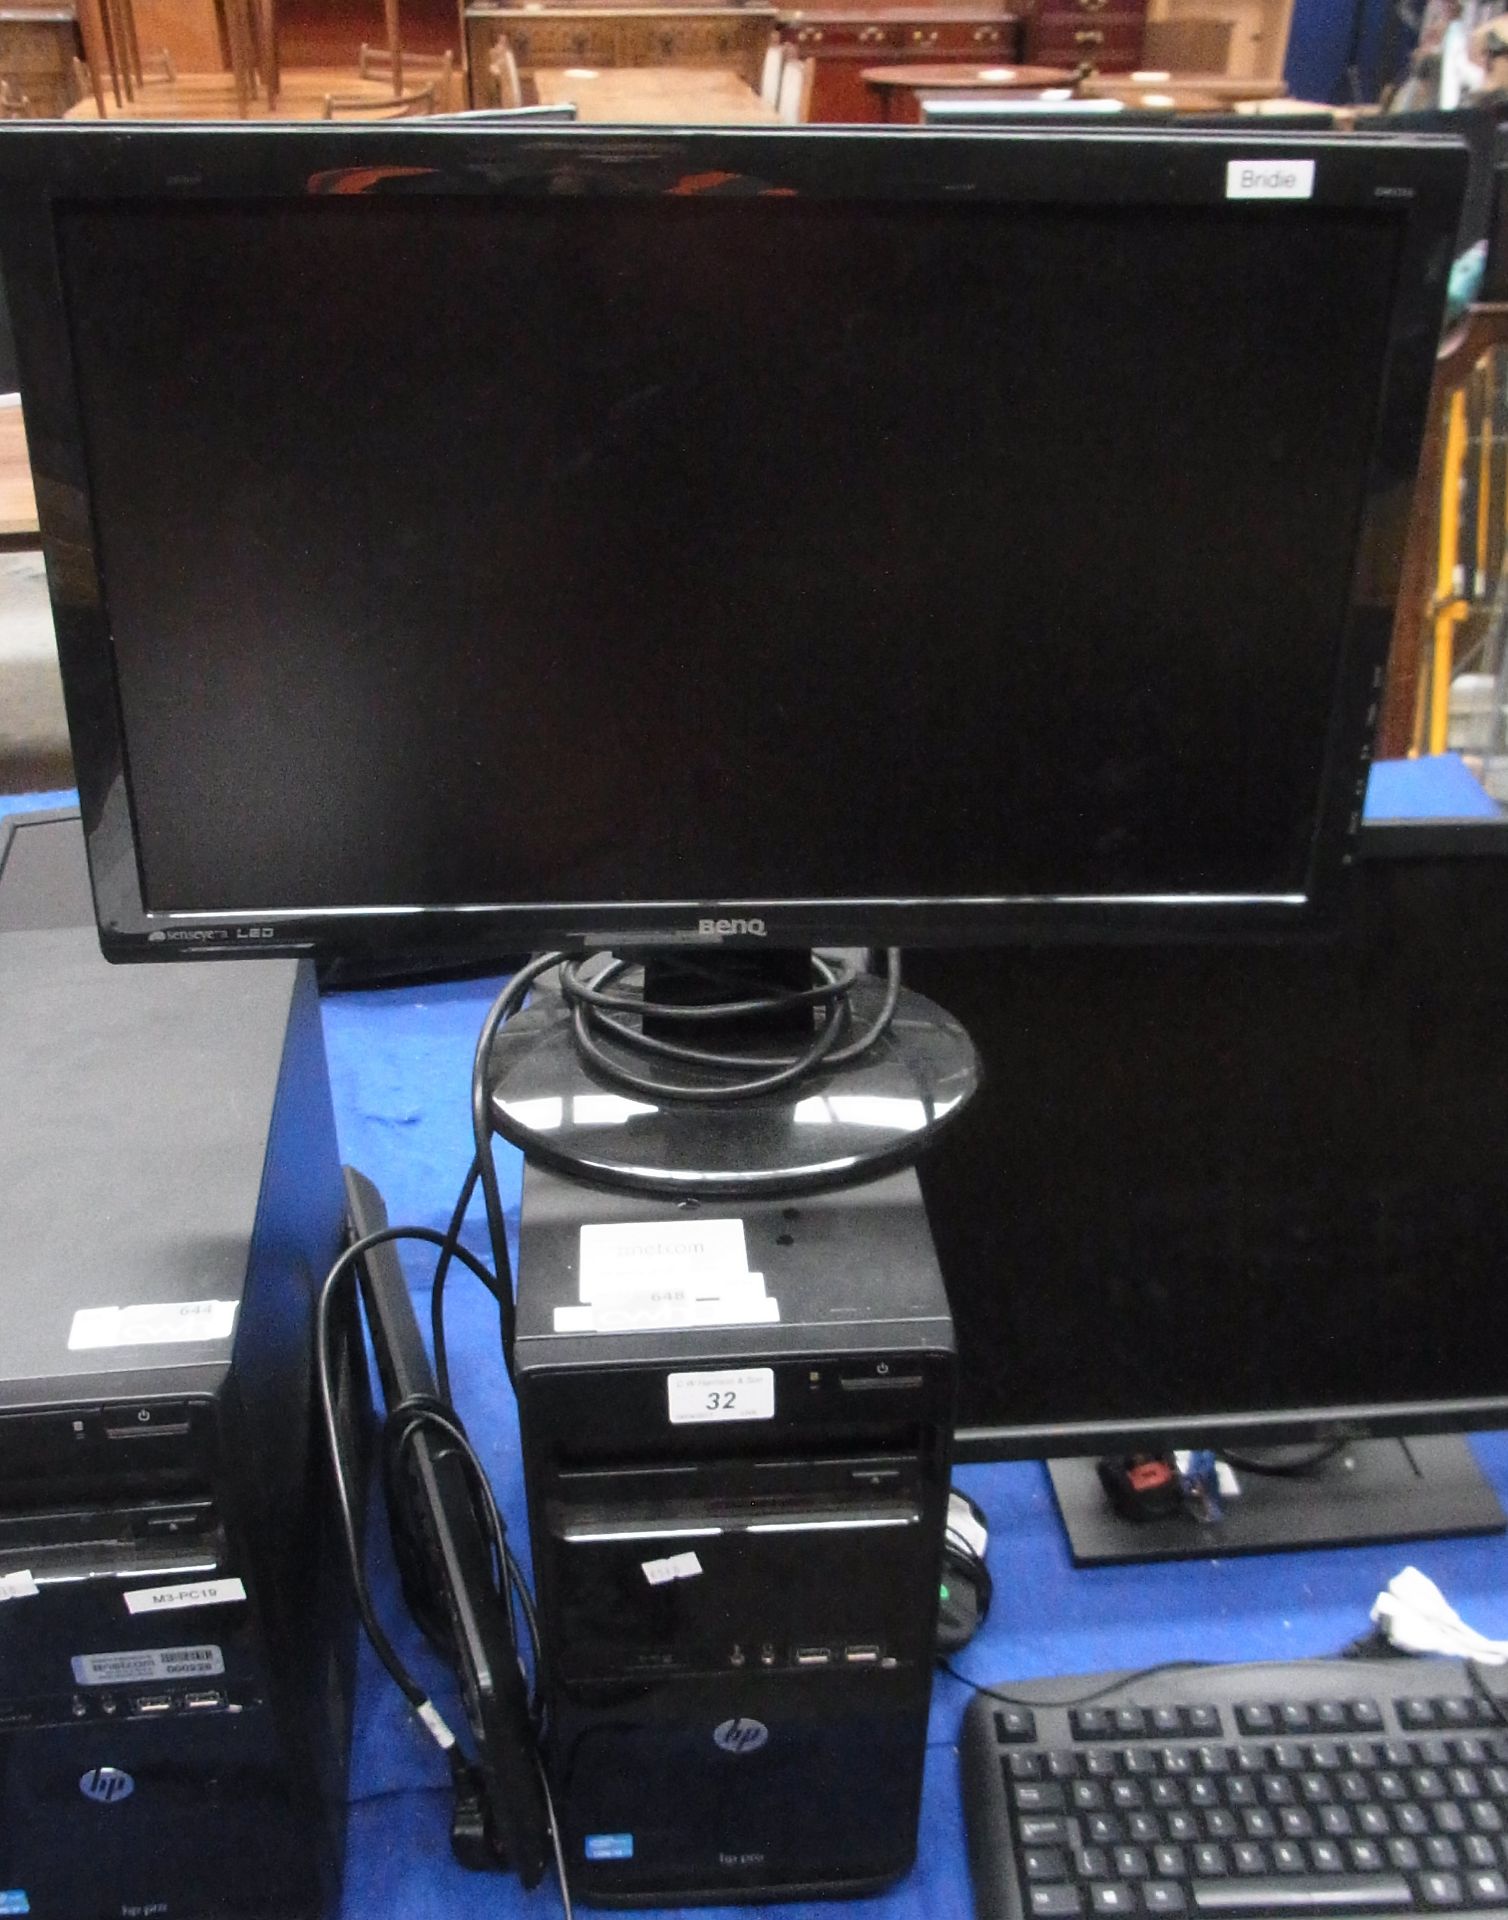 A HP Pro tower computer - power lead complete with a Benq LED 22" monitor - power lead,